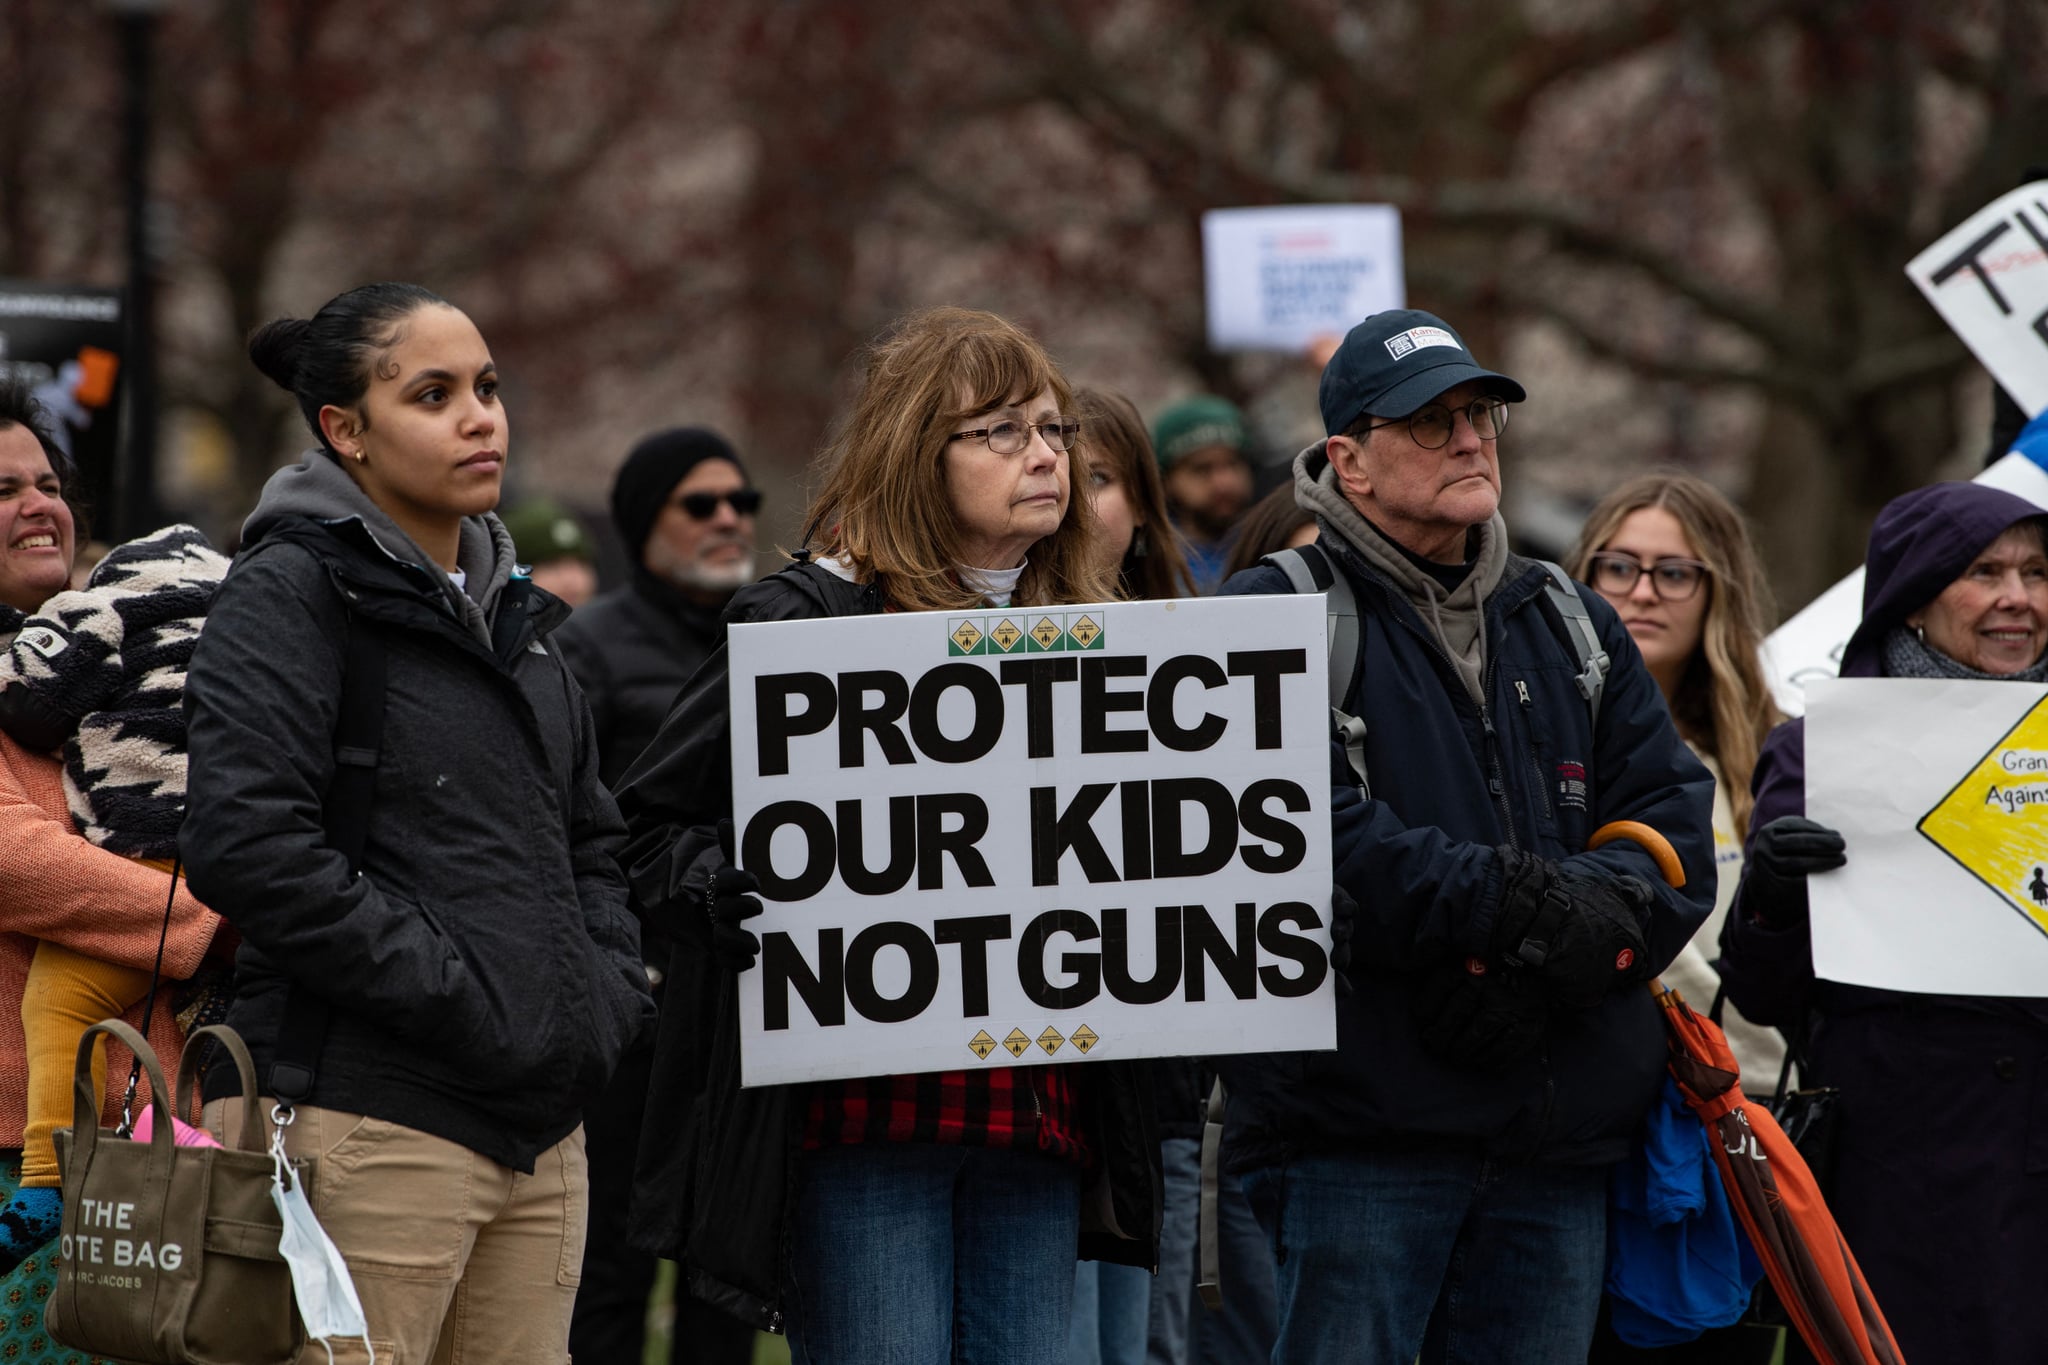 Demonstrators hold signs during an anti-gun violence rally in Boston, Massachusetts, on March 25, 2023. - The rally was organized by the Stand For A Safer Tomorrow, a student led gun violence prevention and awareness organization. (Photo by Joseph Prezioso / AFP) (Photo by JOSEPH PREZIOSO/AFP via Getty Images)